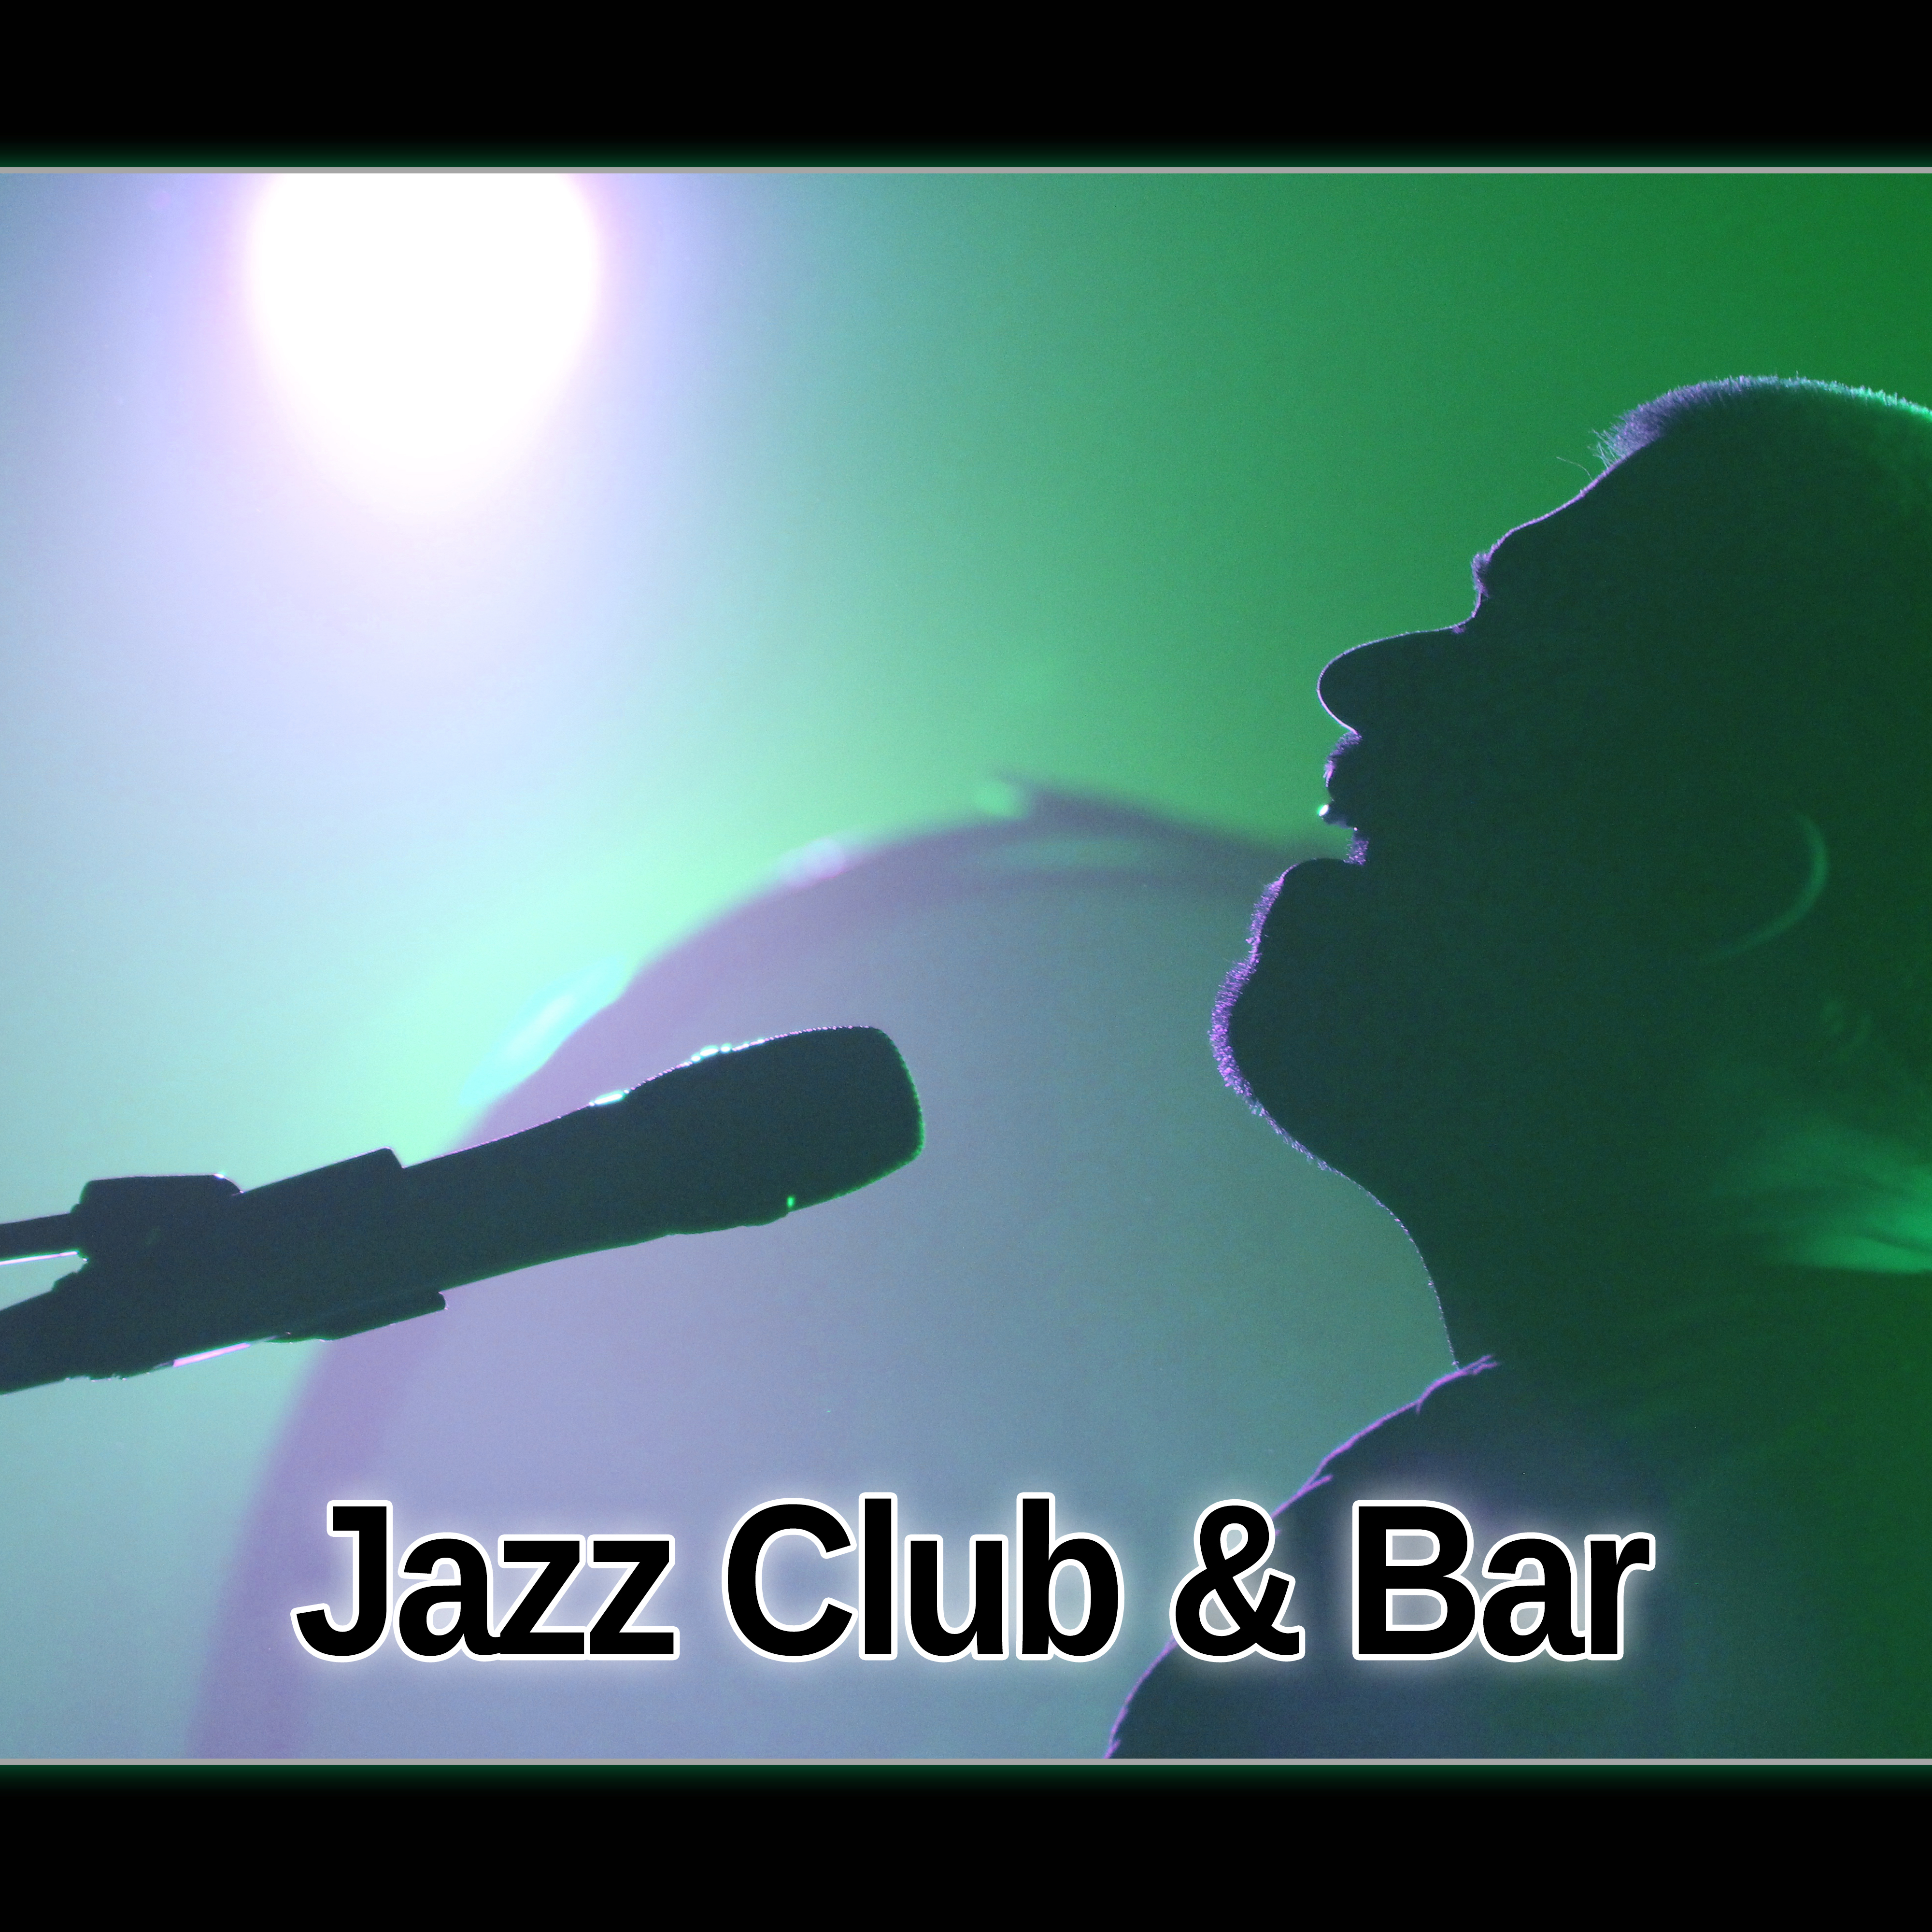 Jazz Club & Bar – Smooth Jazz Music for Background to Club, Relax Time, Mellow Jazz Music for Cocktail Party